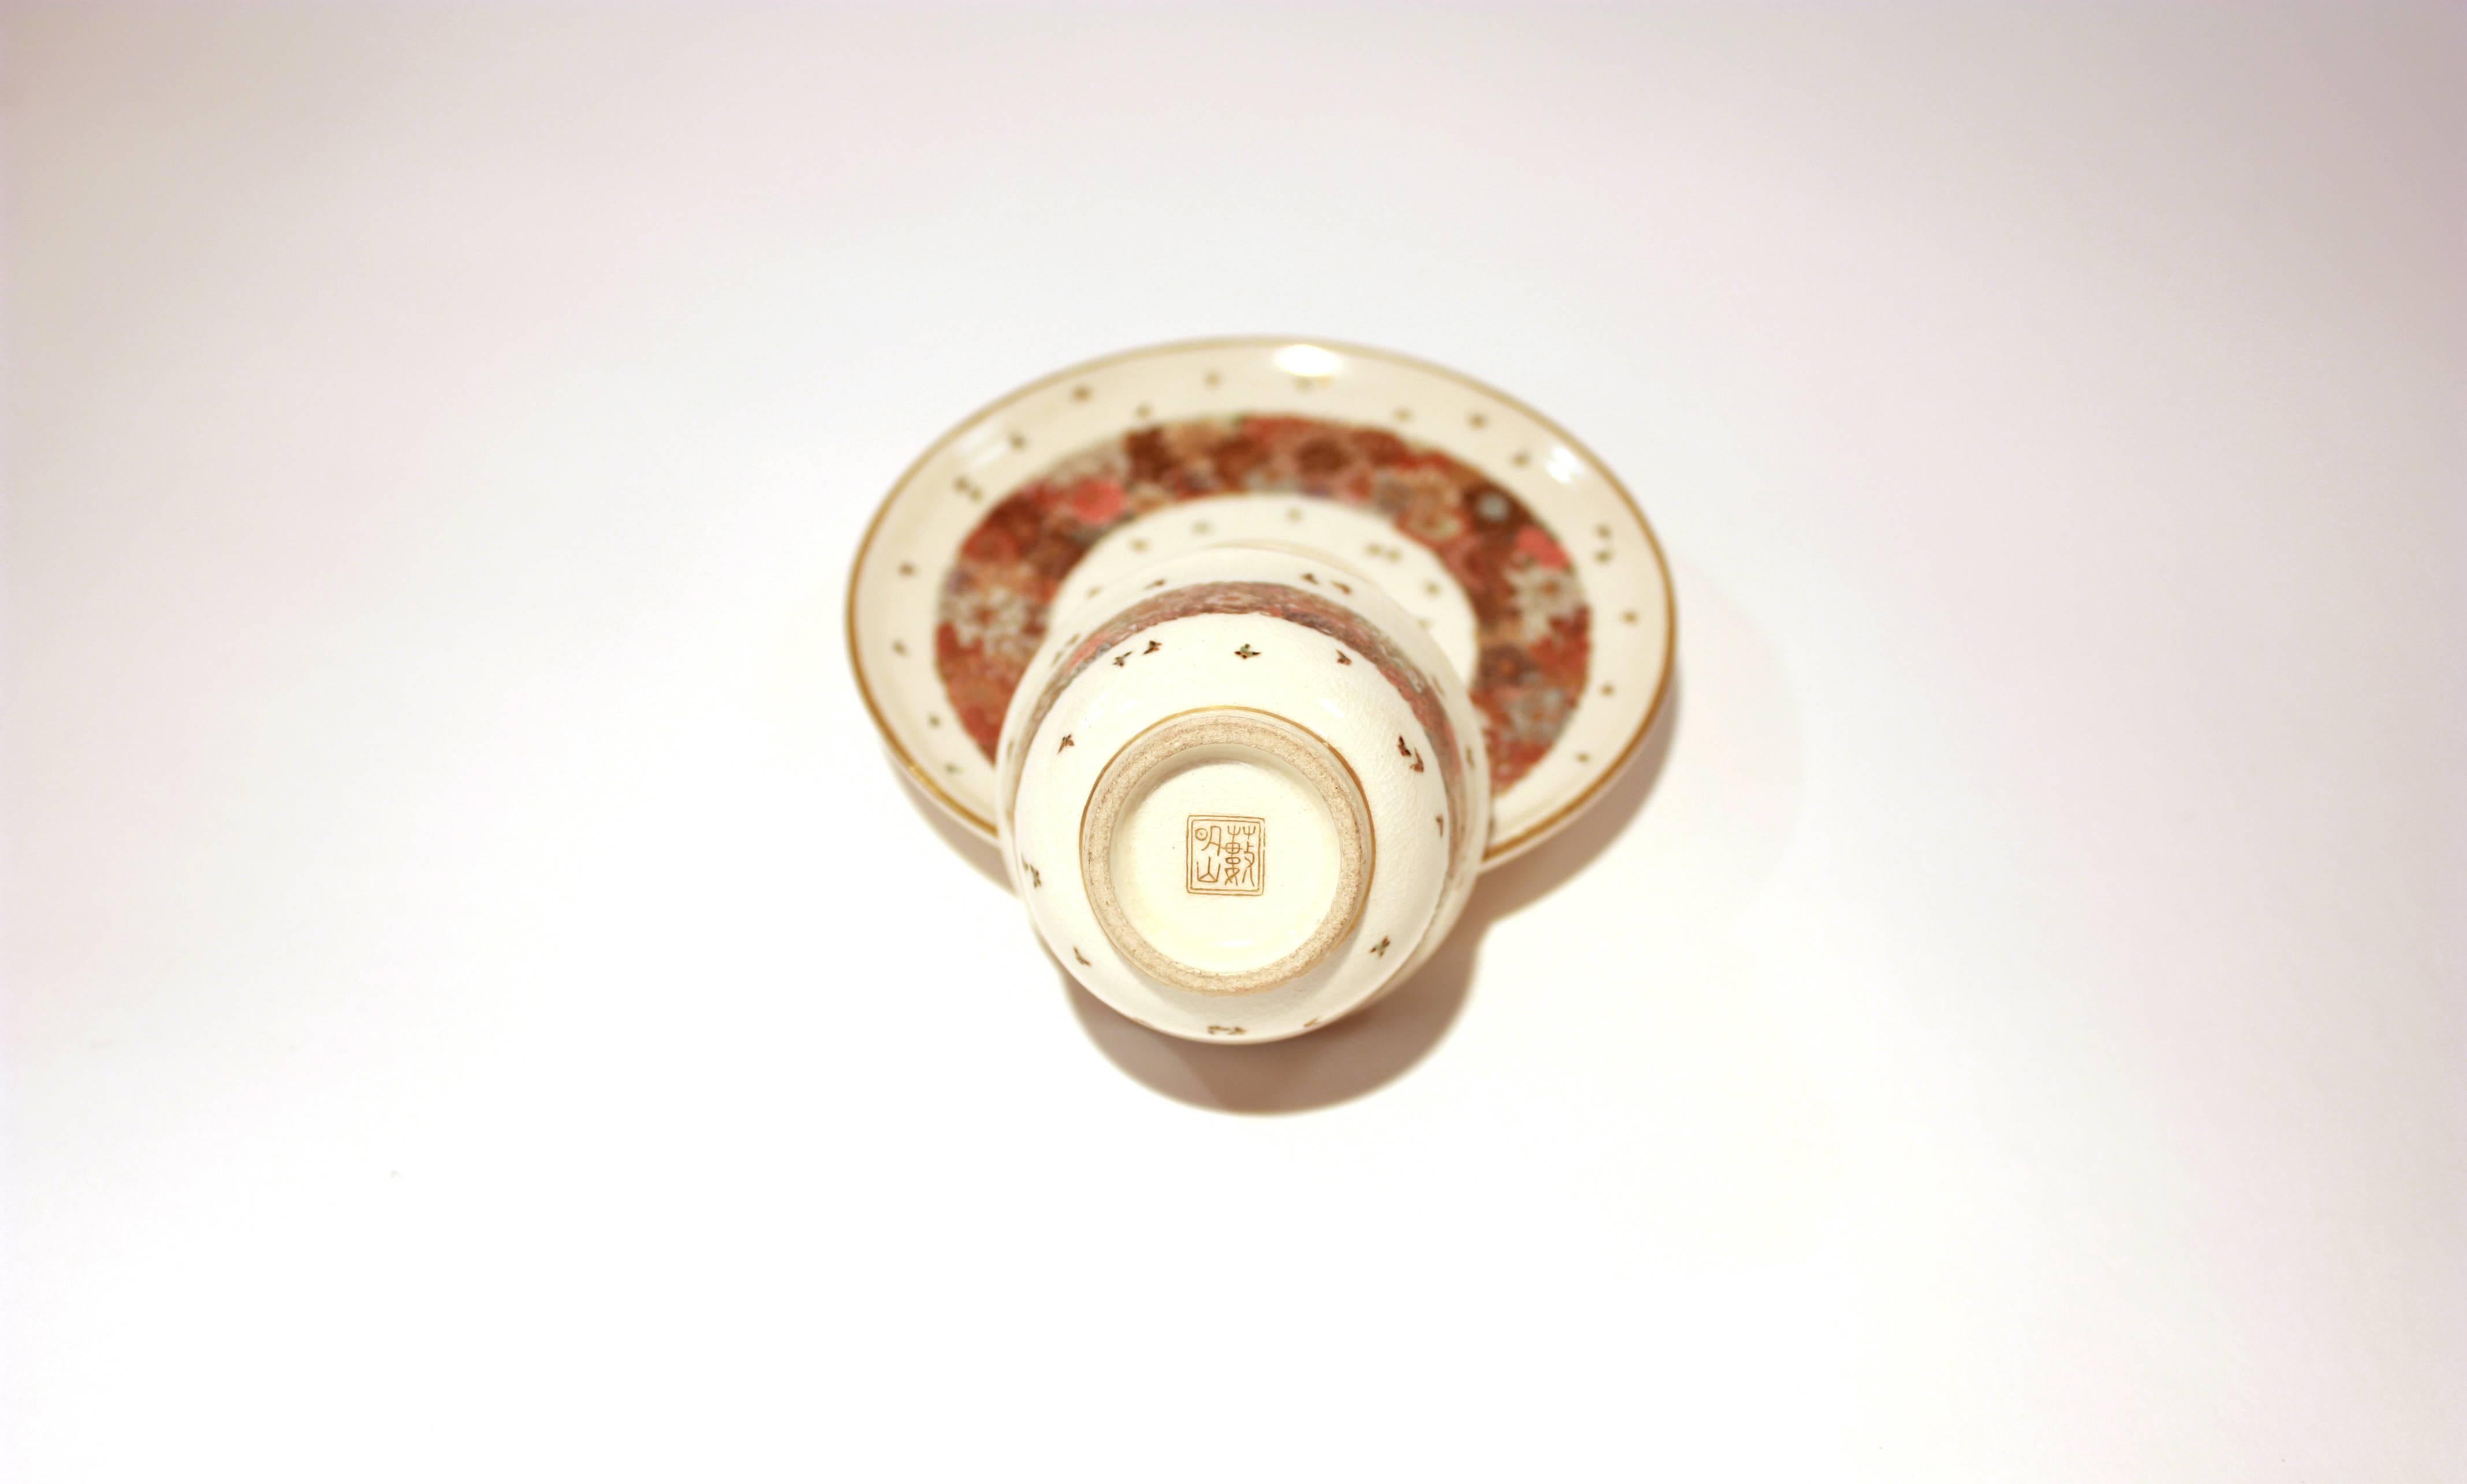 Cup: 4.8 x 4.8 x 3, Saucer: 8.8 x 8.8 x 1.6 (cm)

Yabu Meizan was considered to be one of the greatest ceramic artists of Japan during the 19th and 20th century. He was born in Osaka in 1853 and studied painting techniques on ceramics in Tokyo,